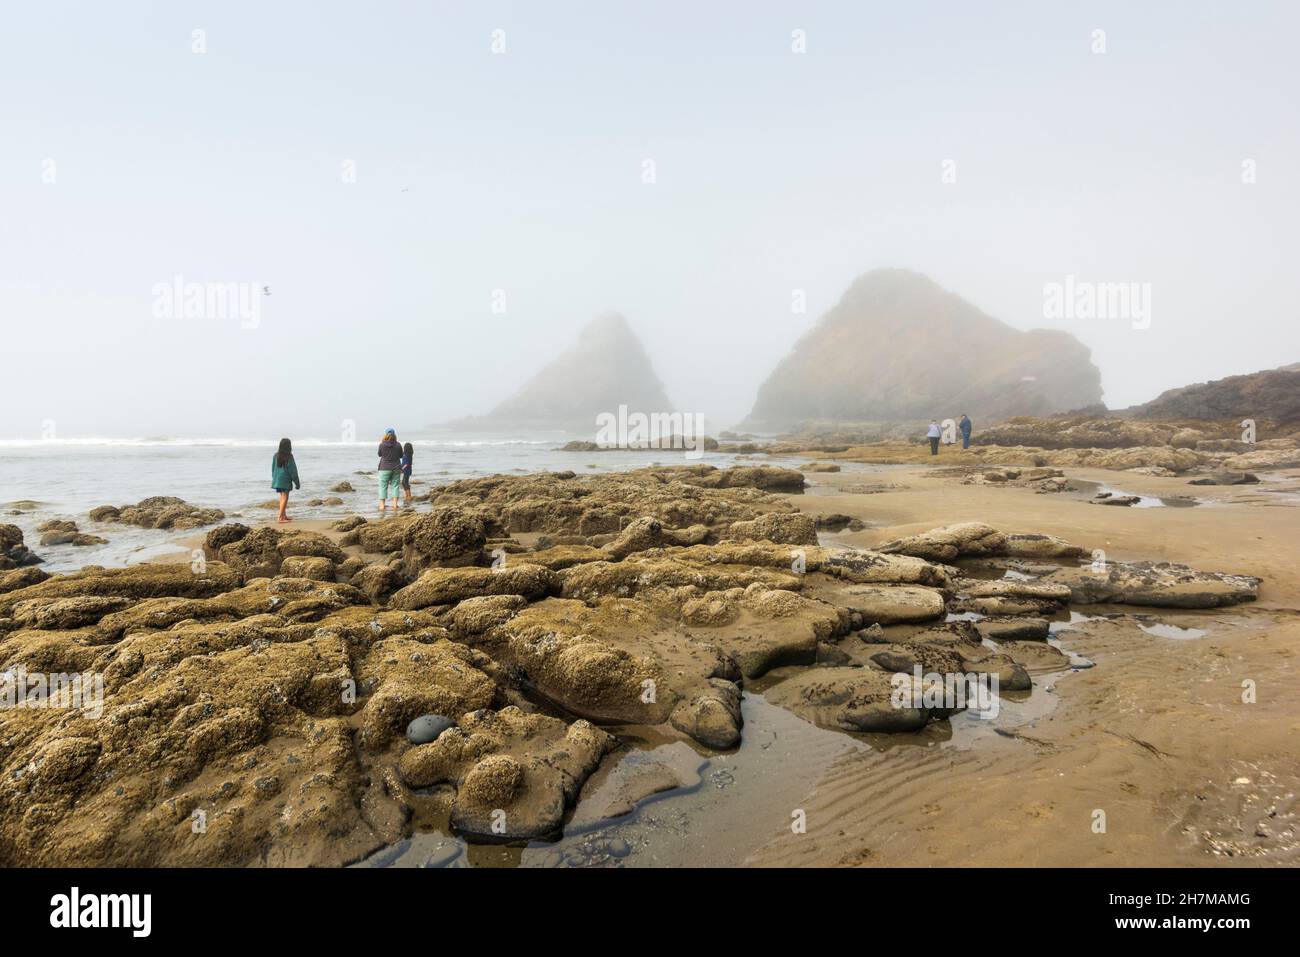 Early foggy morning Pacific coast visitors discovering wildlife in tidal pools at Heceta Head lighthouse beach, Oregon, United States Stock Photo